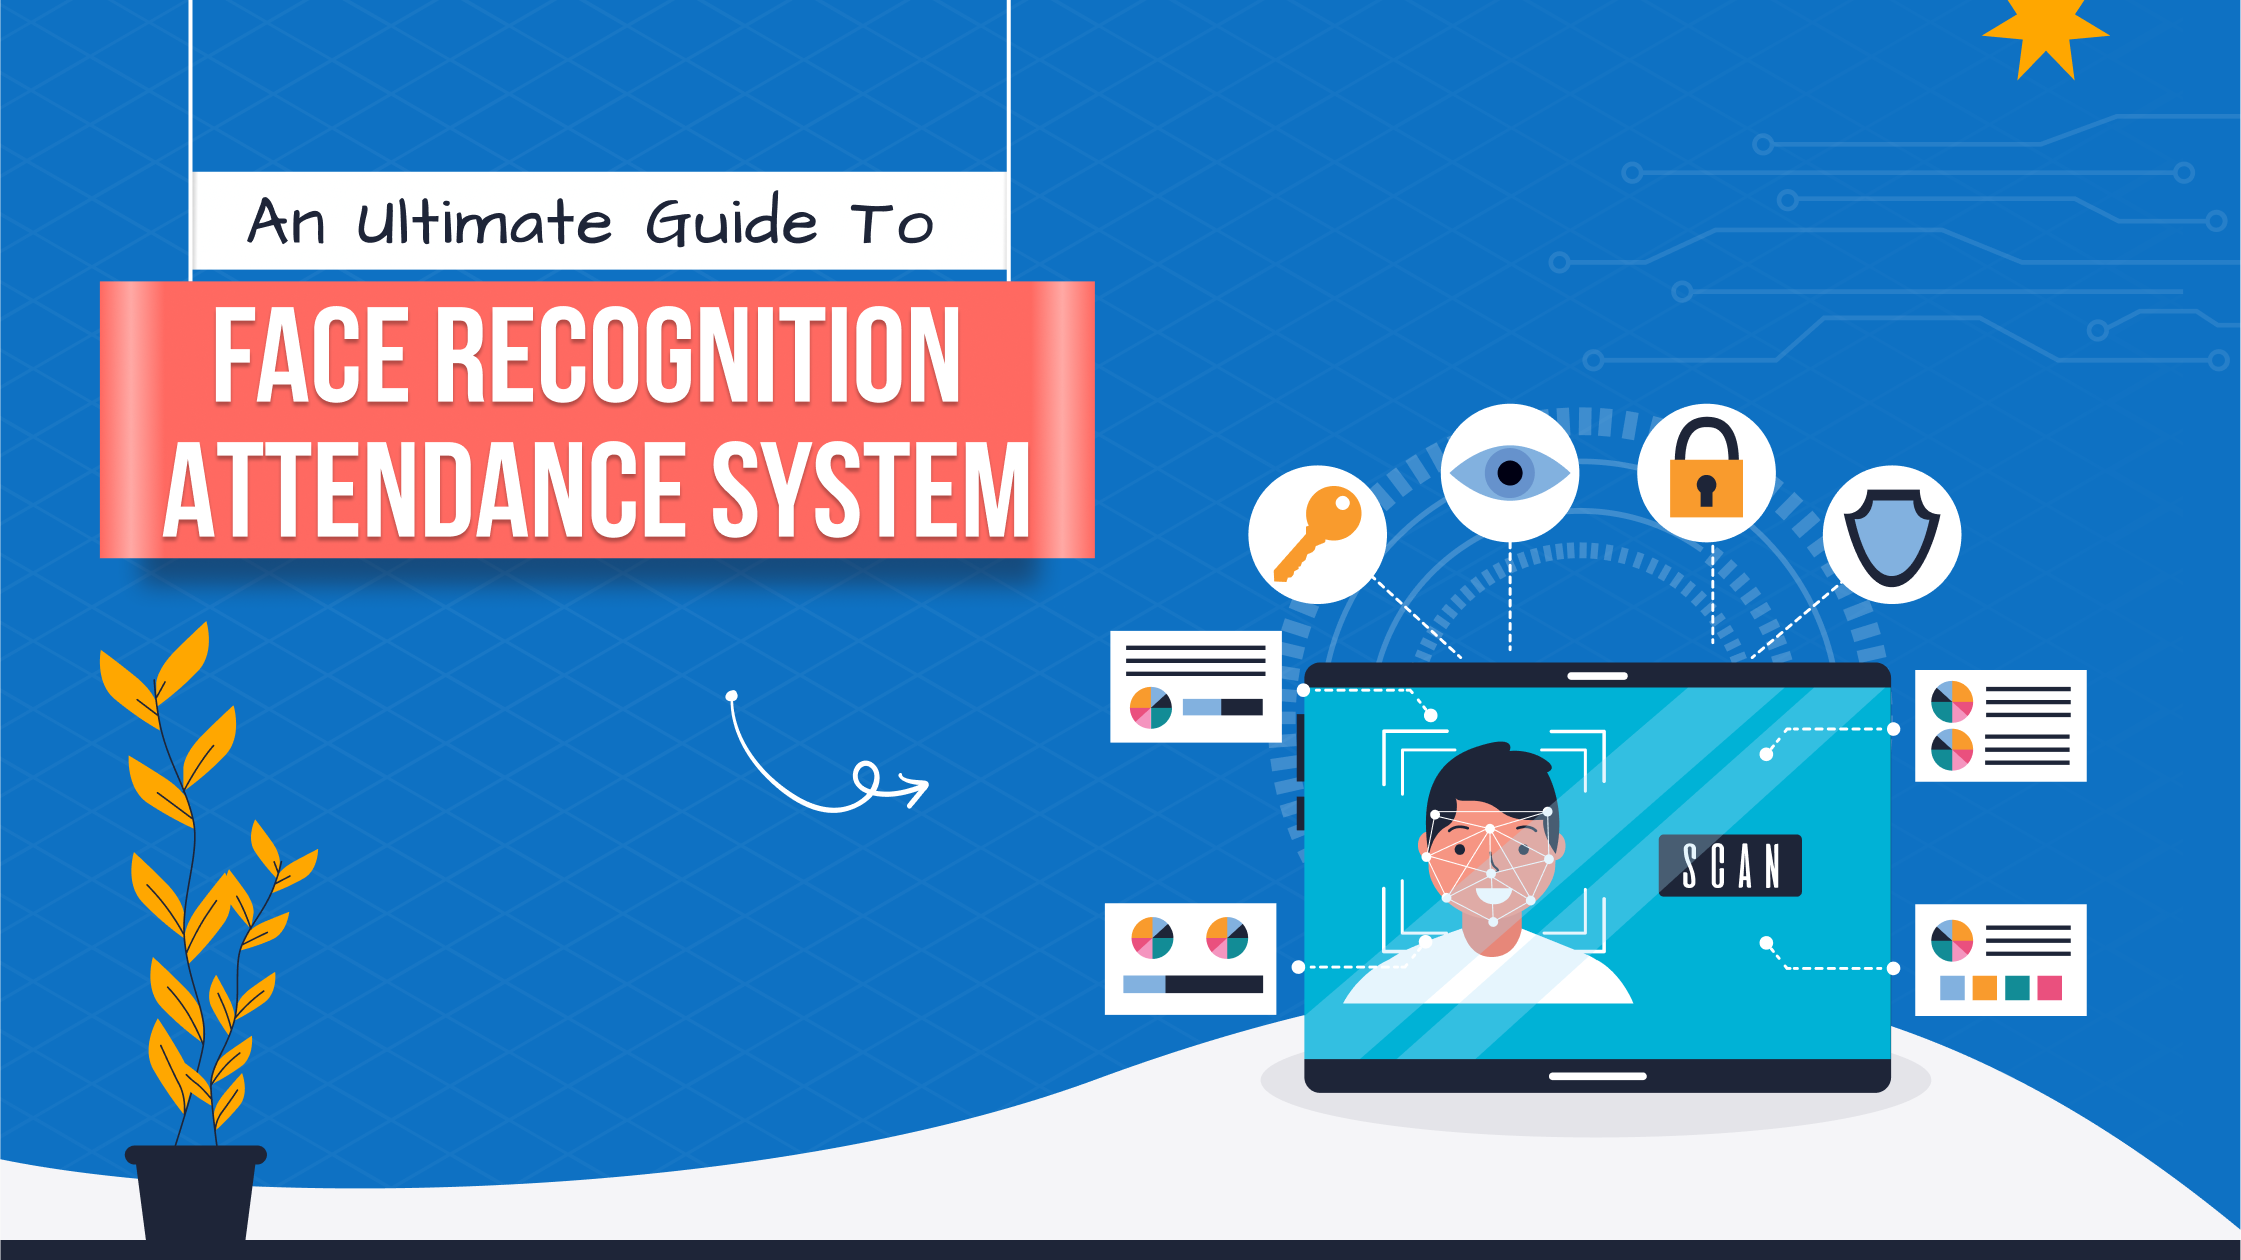 An Ultimate Guide To Face Recognition Attendance System